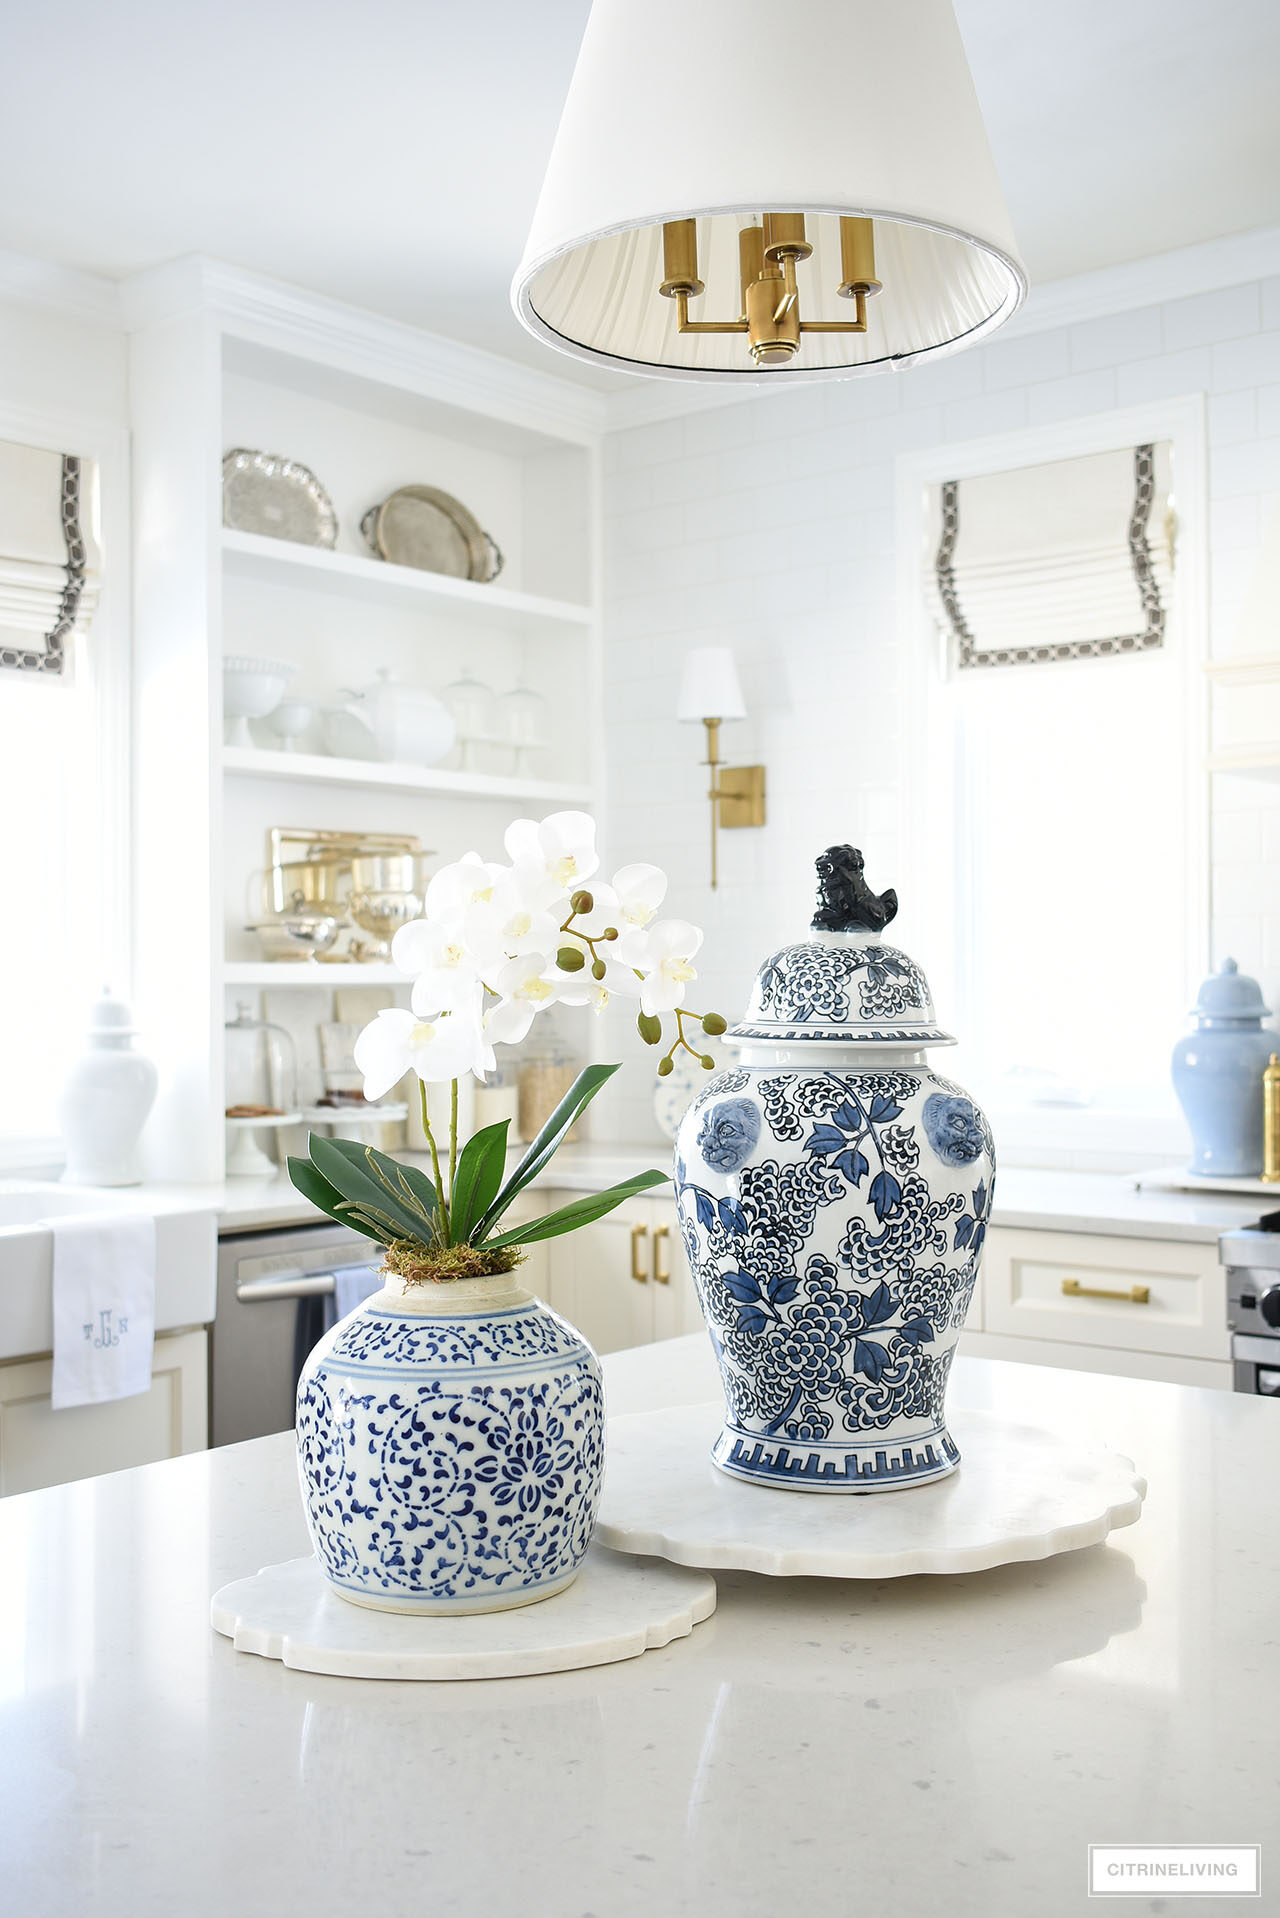 Kitchen island decorated for spring with blue and white ginger jars and an elegant orchid arrangement, set on marble boards.